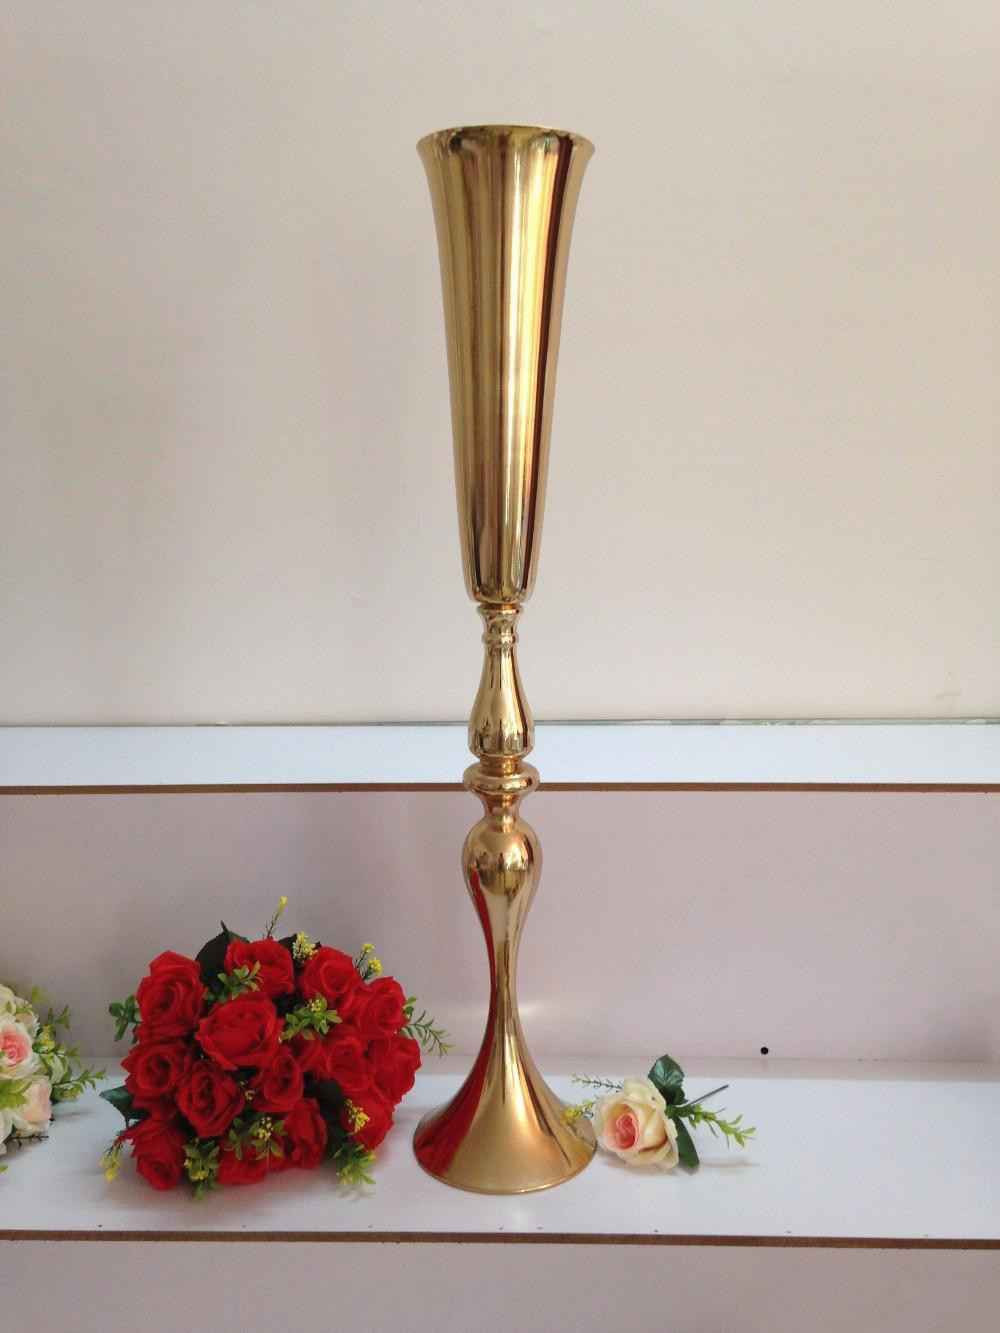 13 Wonderful Target Gold Vase 2024 free download target gold vase of tall gold vase gallery real flower petals imposing tall vase for tall gold vase photos faux crystal candle holders alive vases gold tall jpgi 0d cheap in